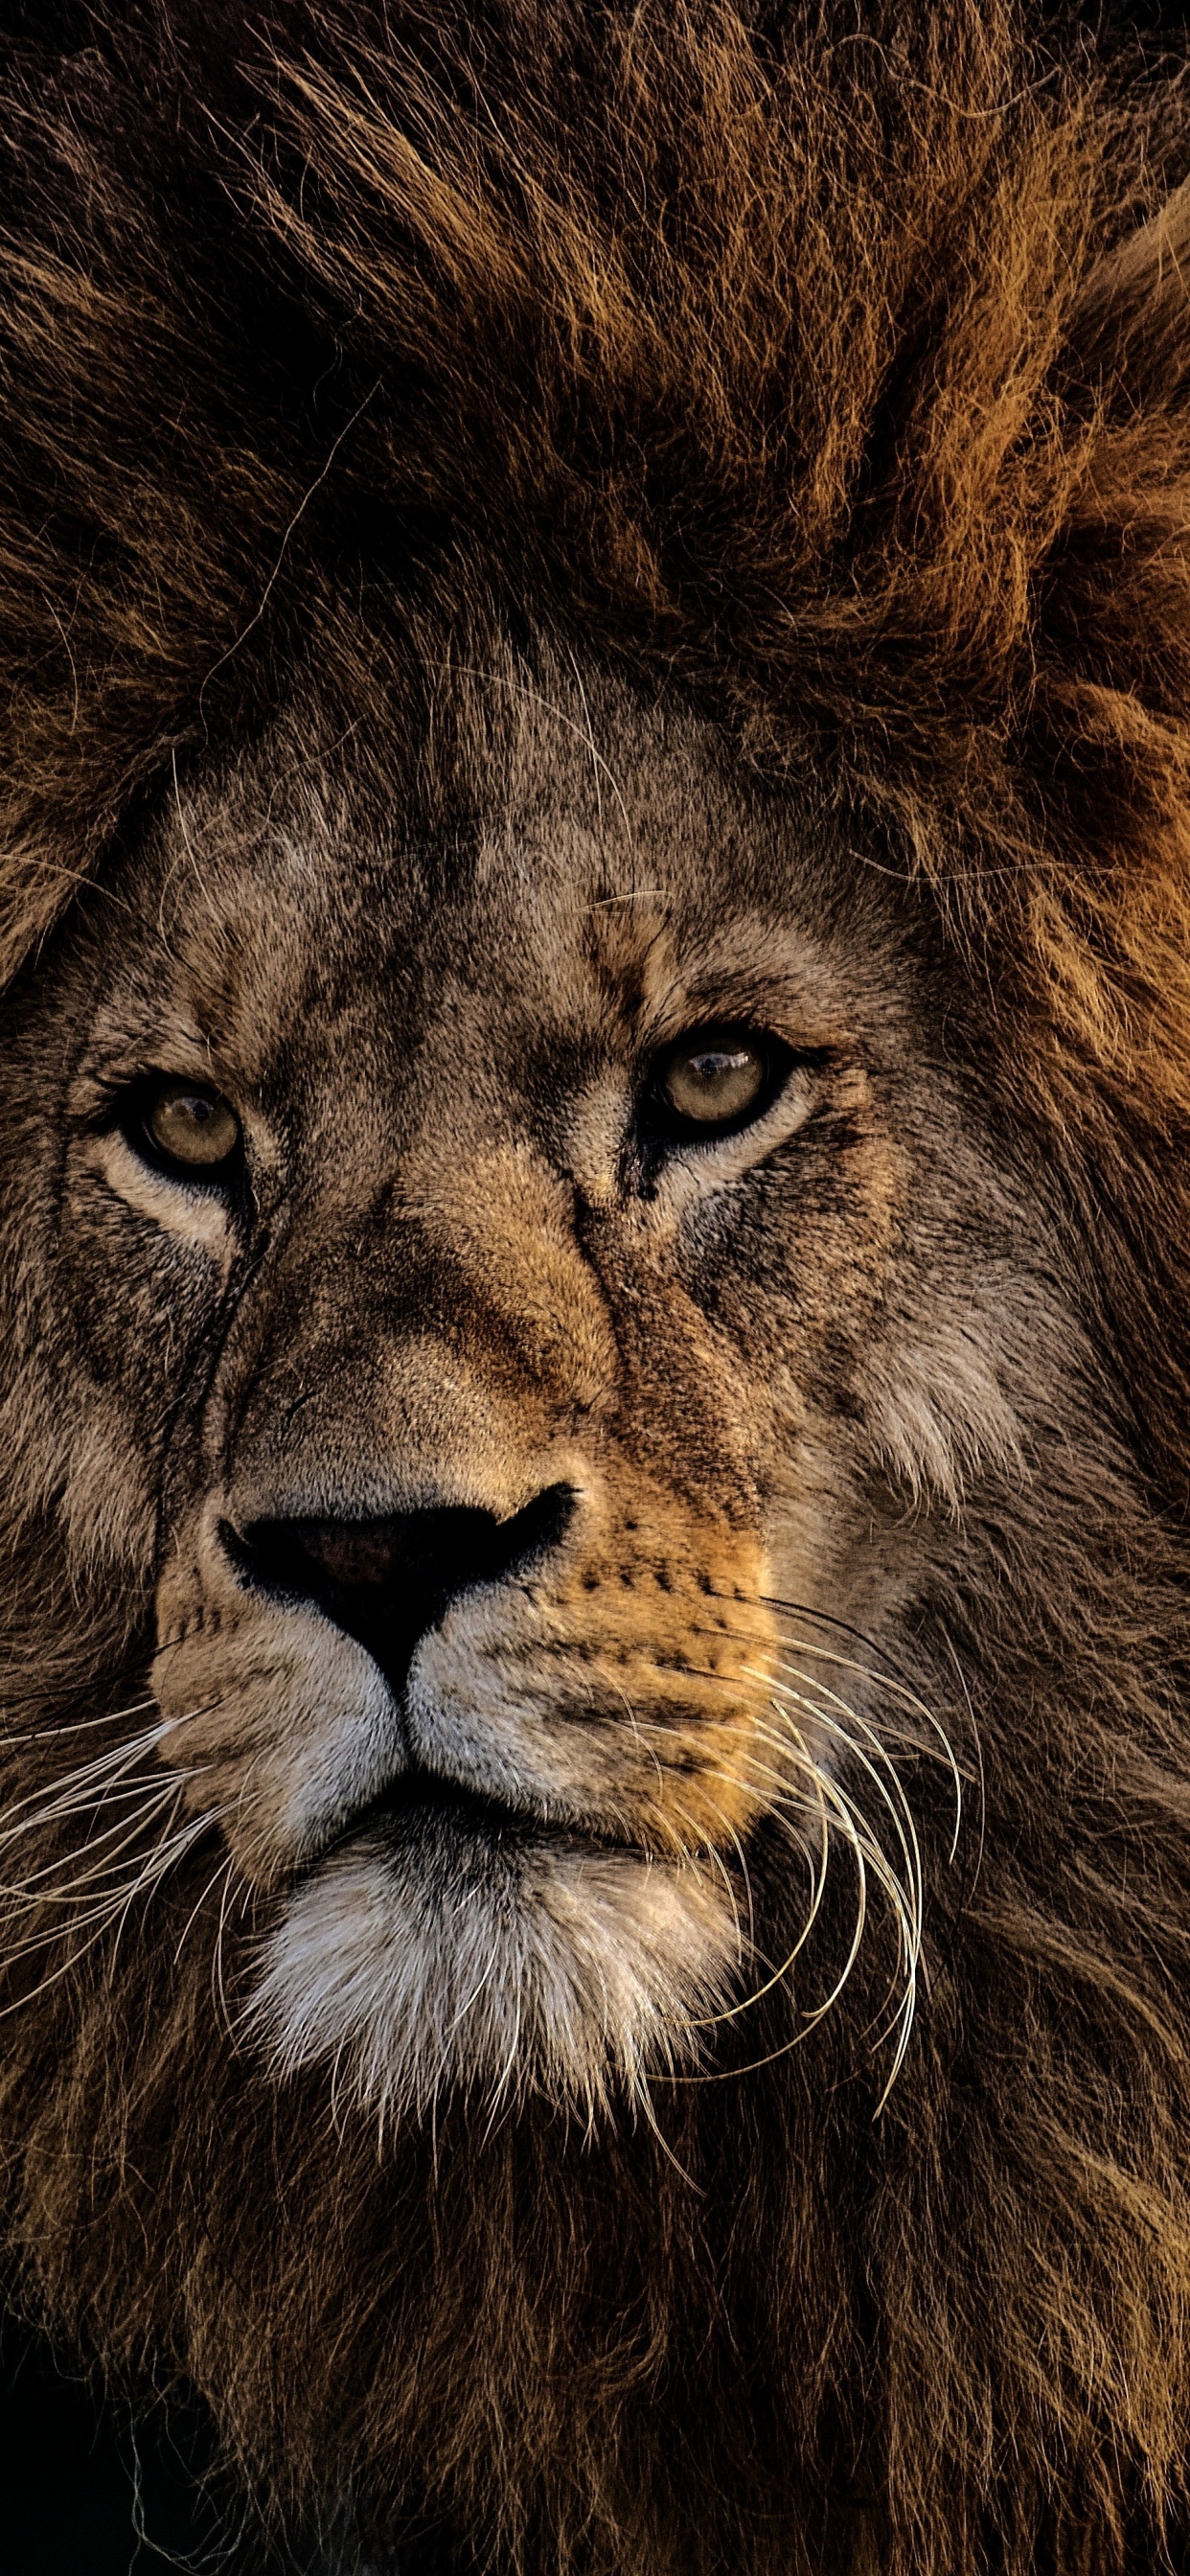 Lion With Black Background in Close up Photography. Wallpaper in 1242x2688 Resolution